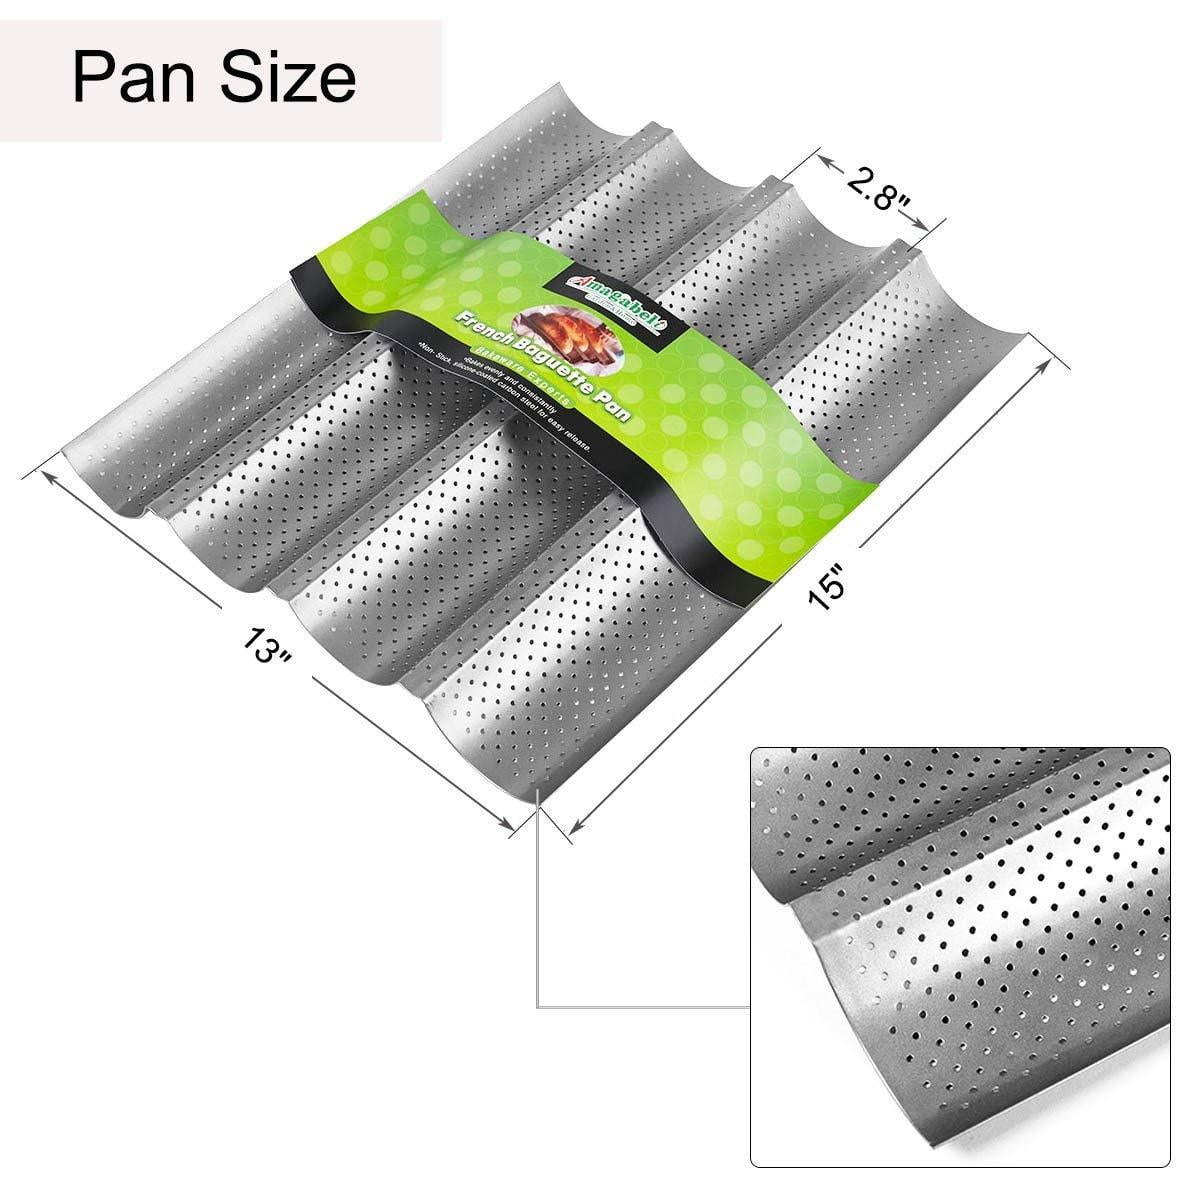 Size M 3 Slots Black UPKOCH Baguette Pan Nonstick Perforated French Bread Baking Bake Mold Toast Cooking Baker Molding Oven Toaster Pan Cloche Waves Steel Tray 